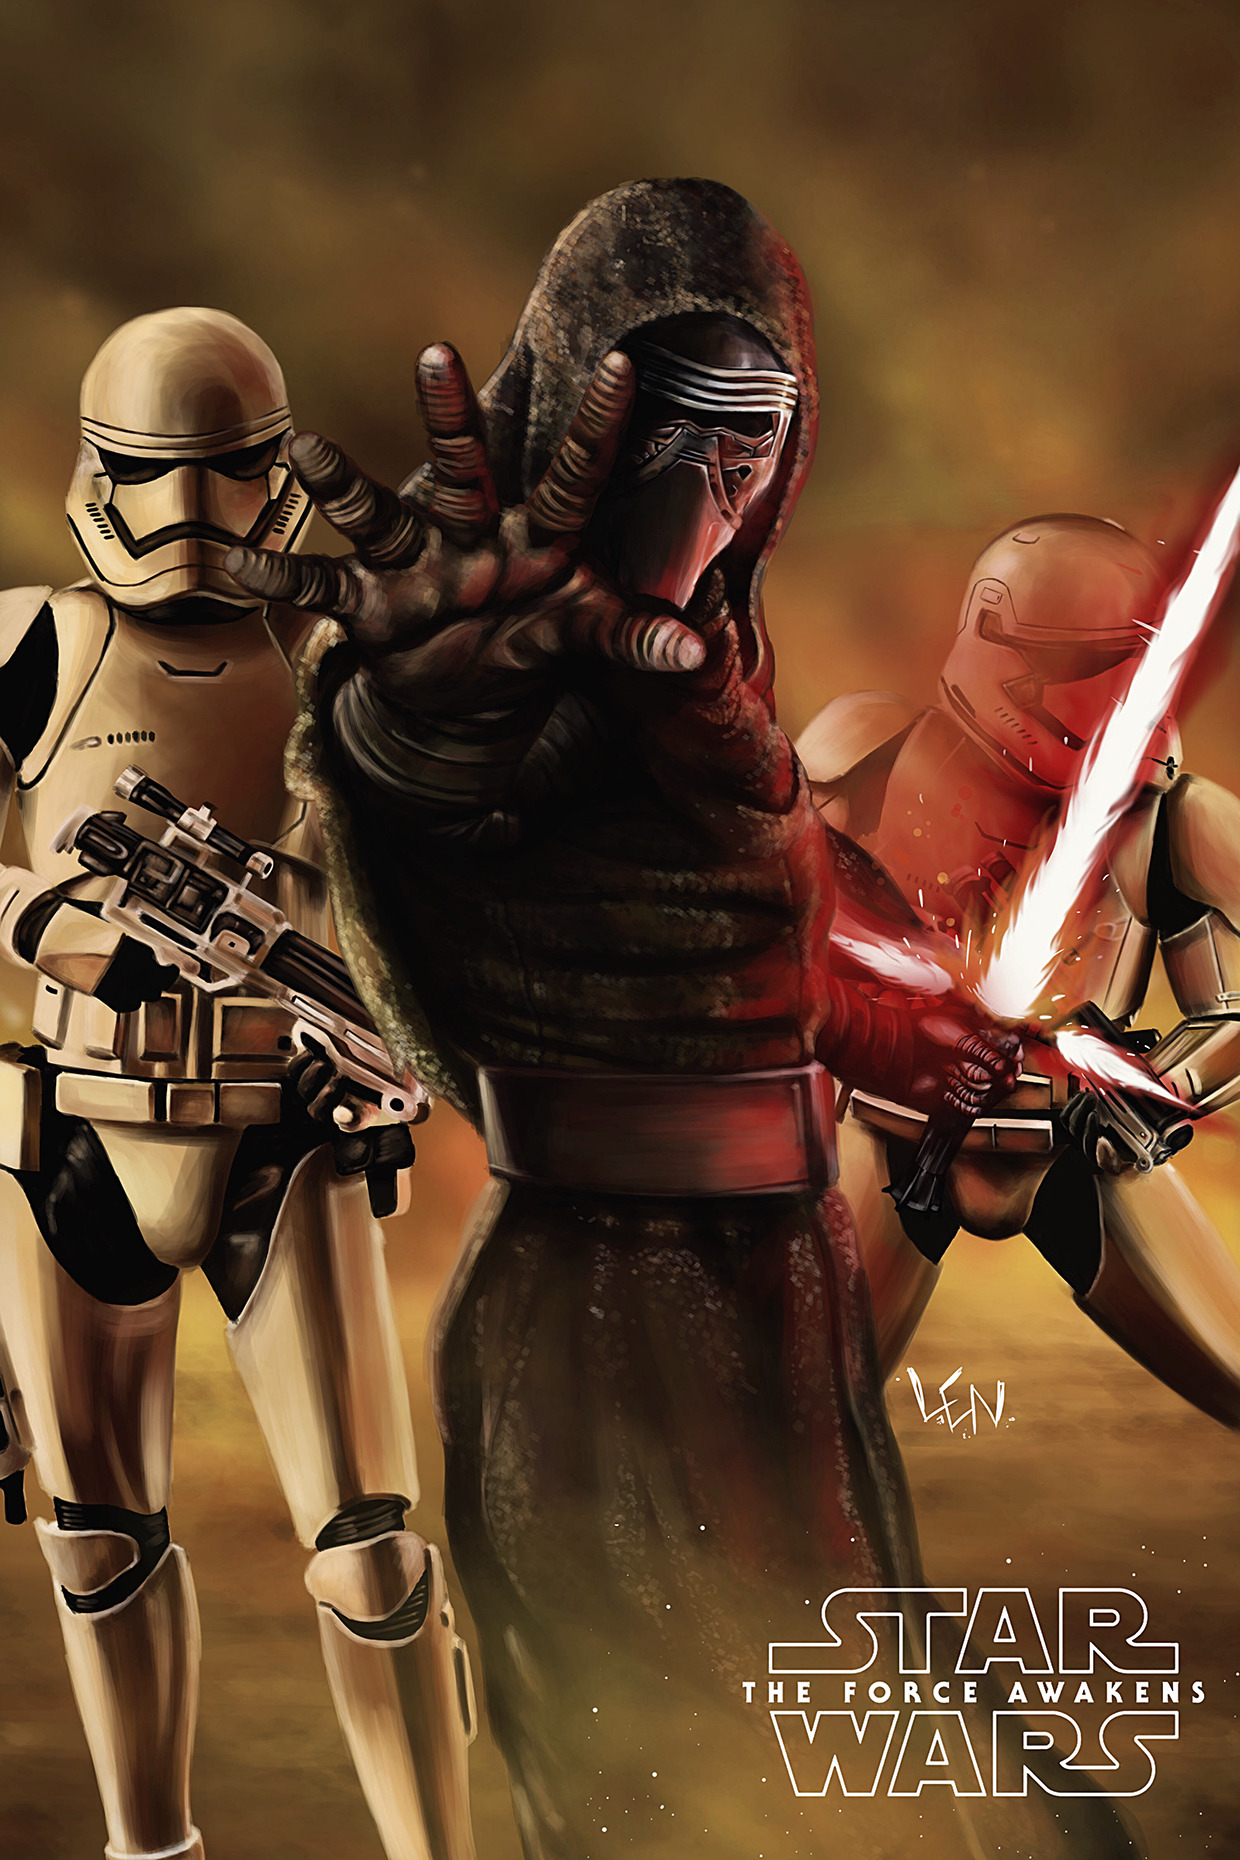 The Force Awakens by Larry Neal